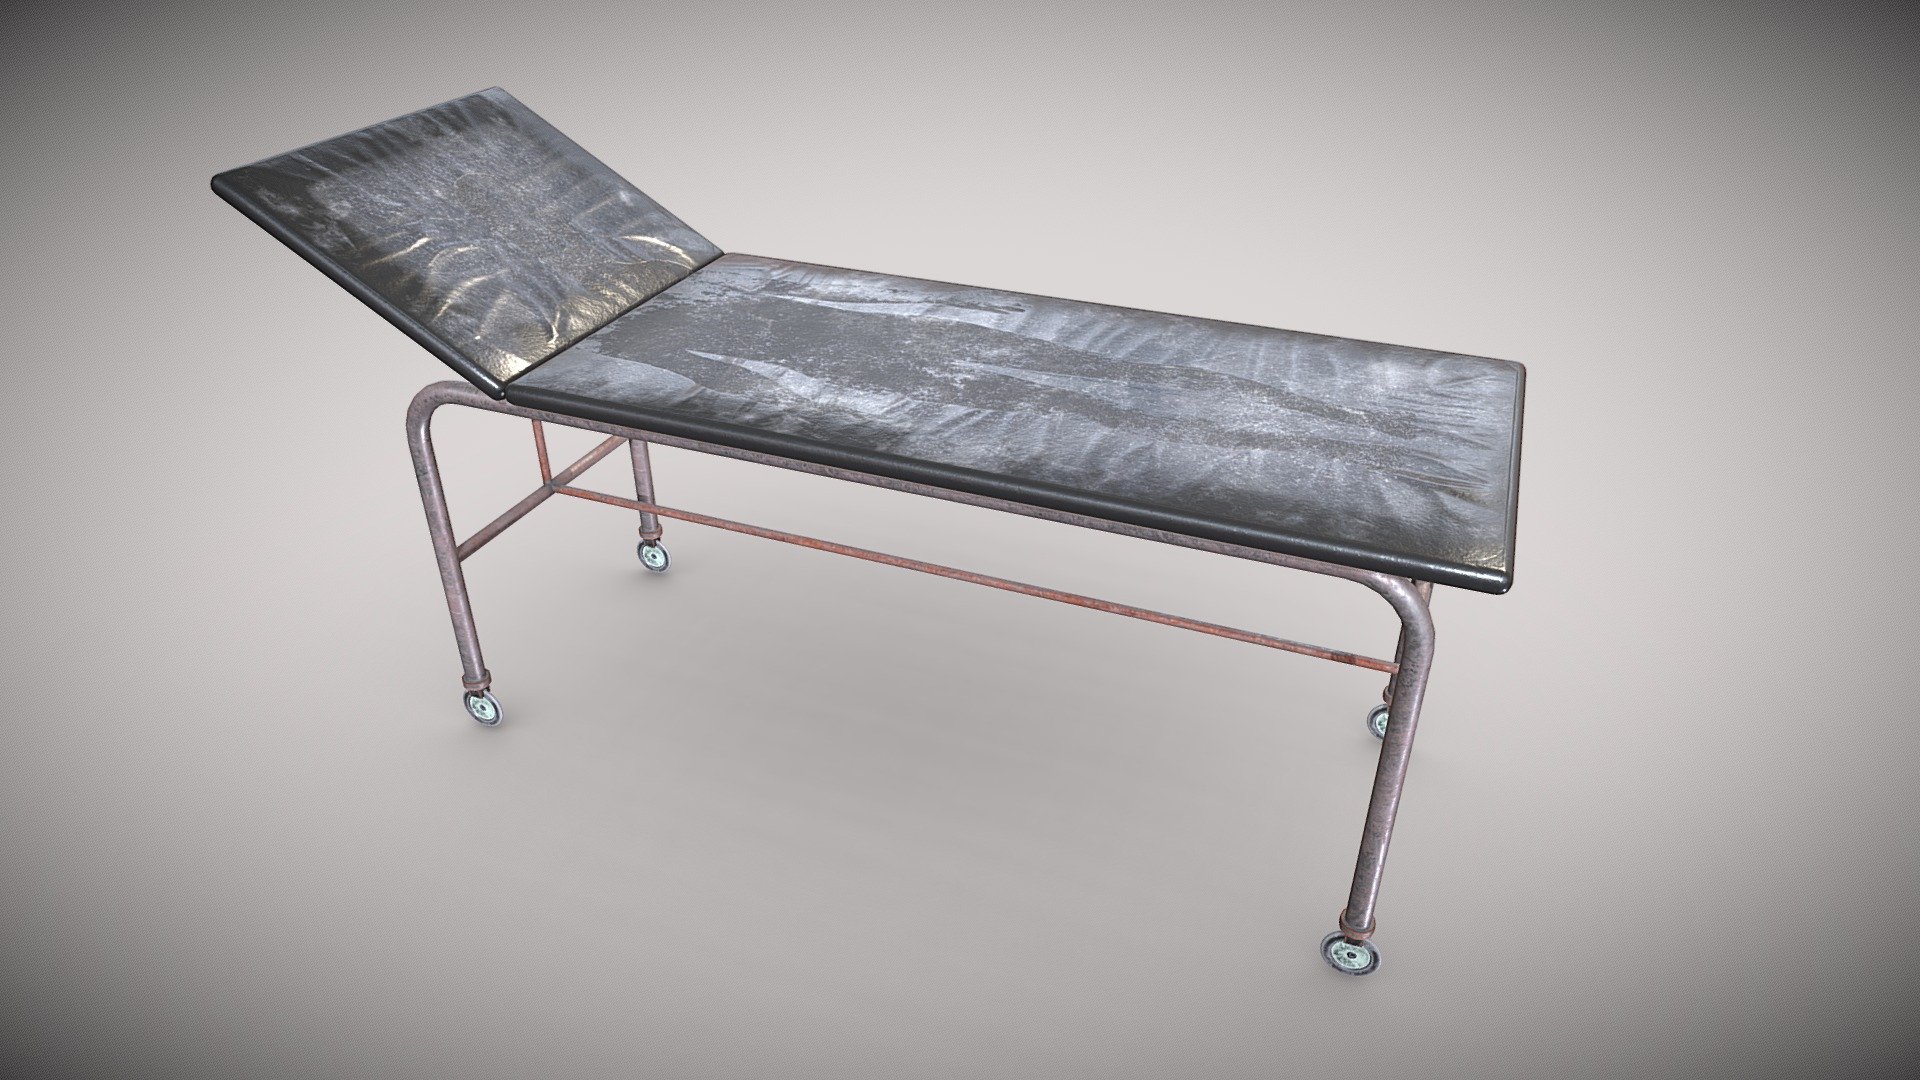 Simple rusty examination table, handy prop for any sort of horror / post apocalyptic environment.

PBR textures @4k - Post apocalyptic examination table - Download Free 3D model by Sousinho 3d model